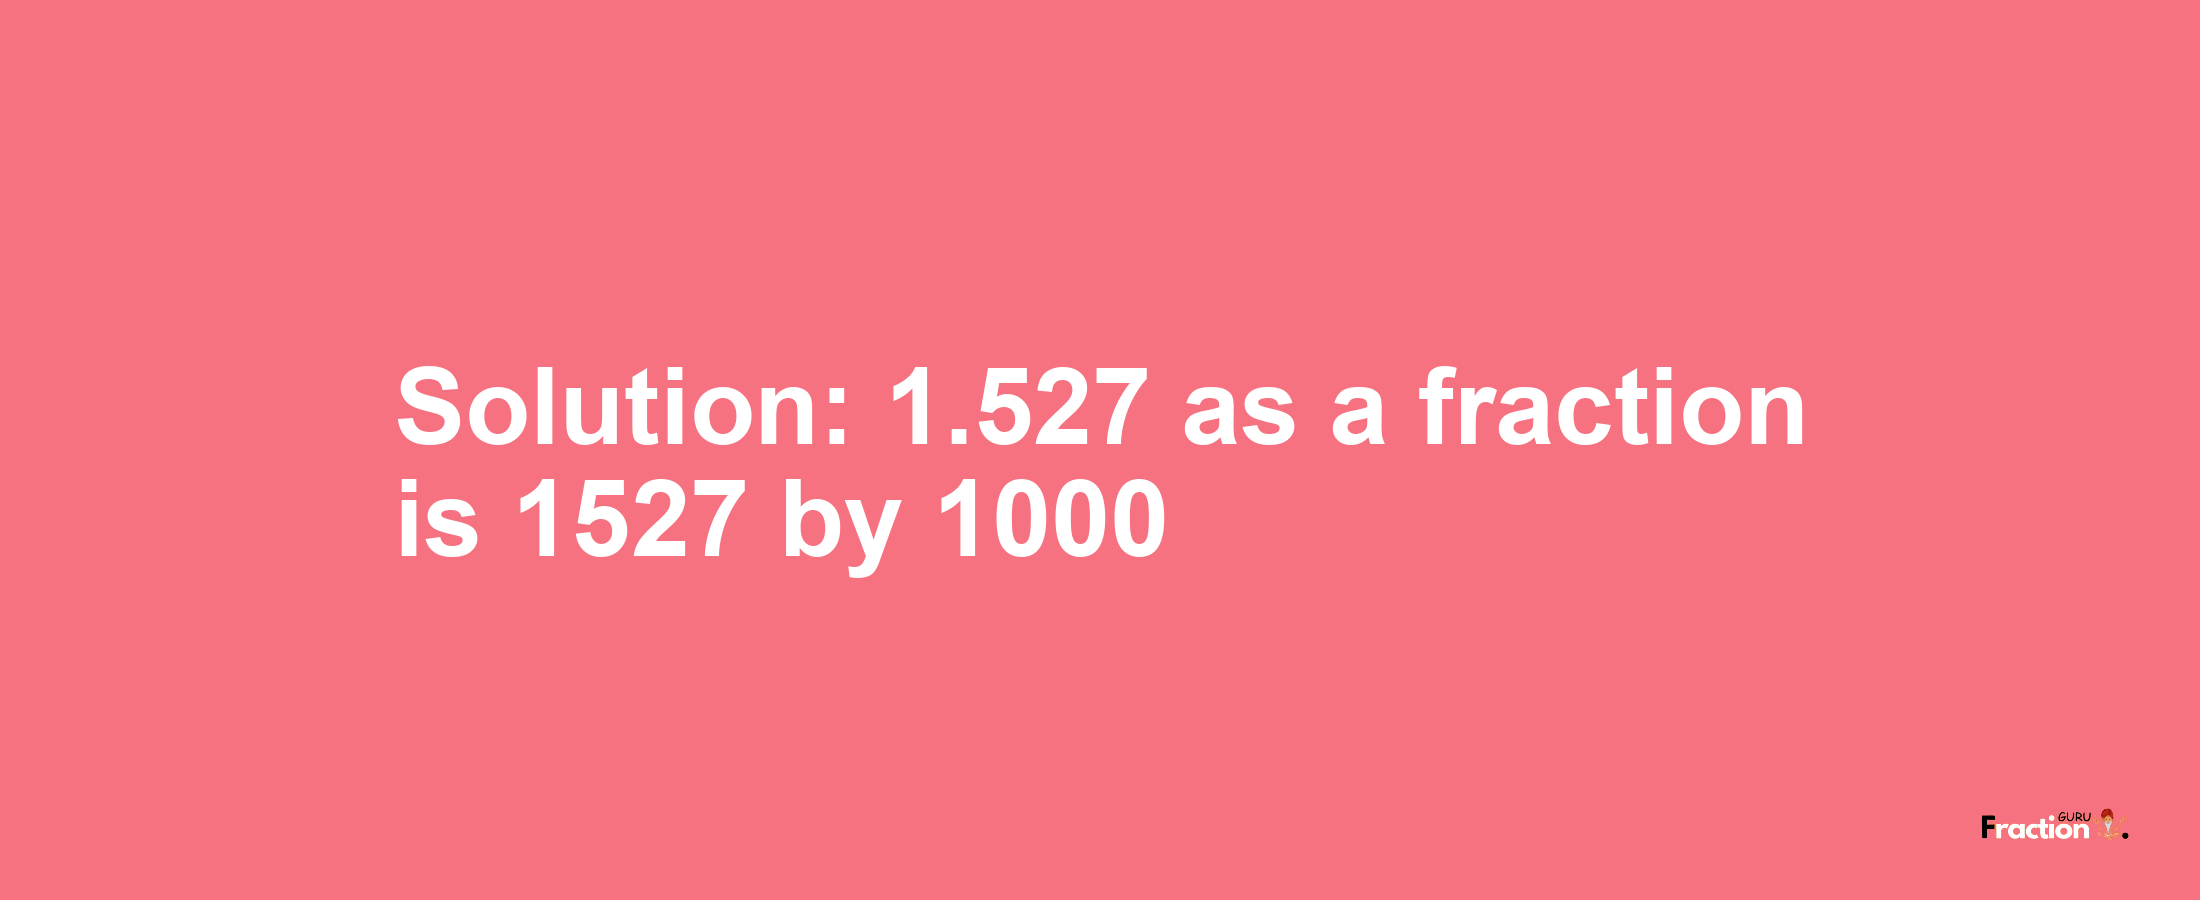 Solution:1.527 as a fraction is 1527/1000